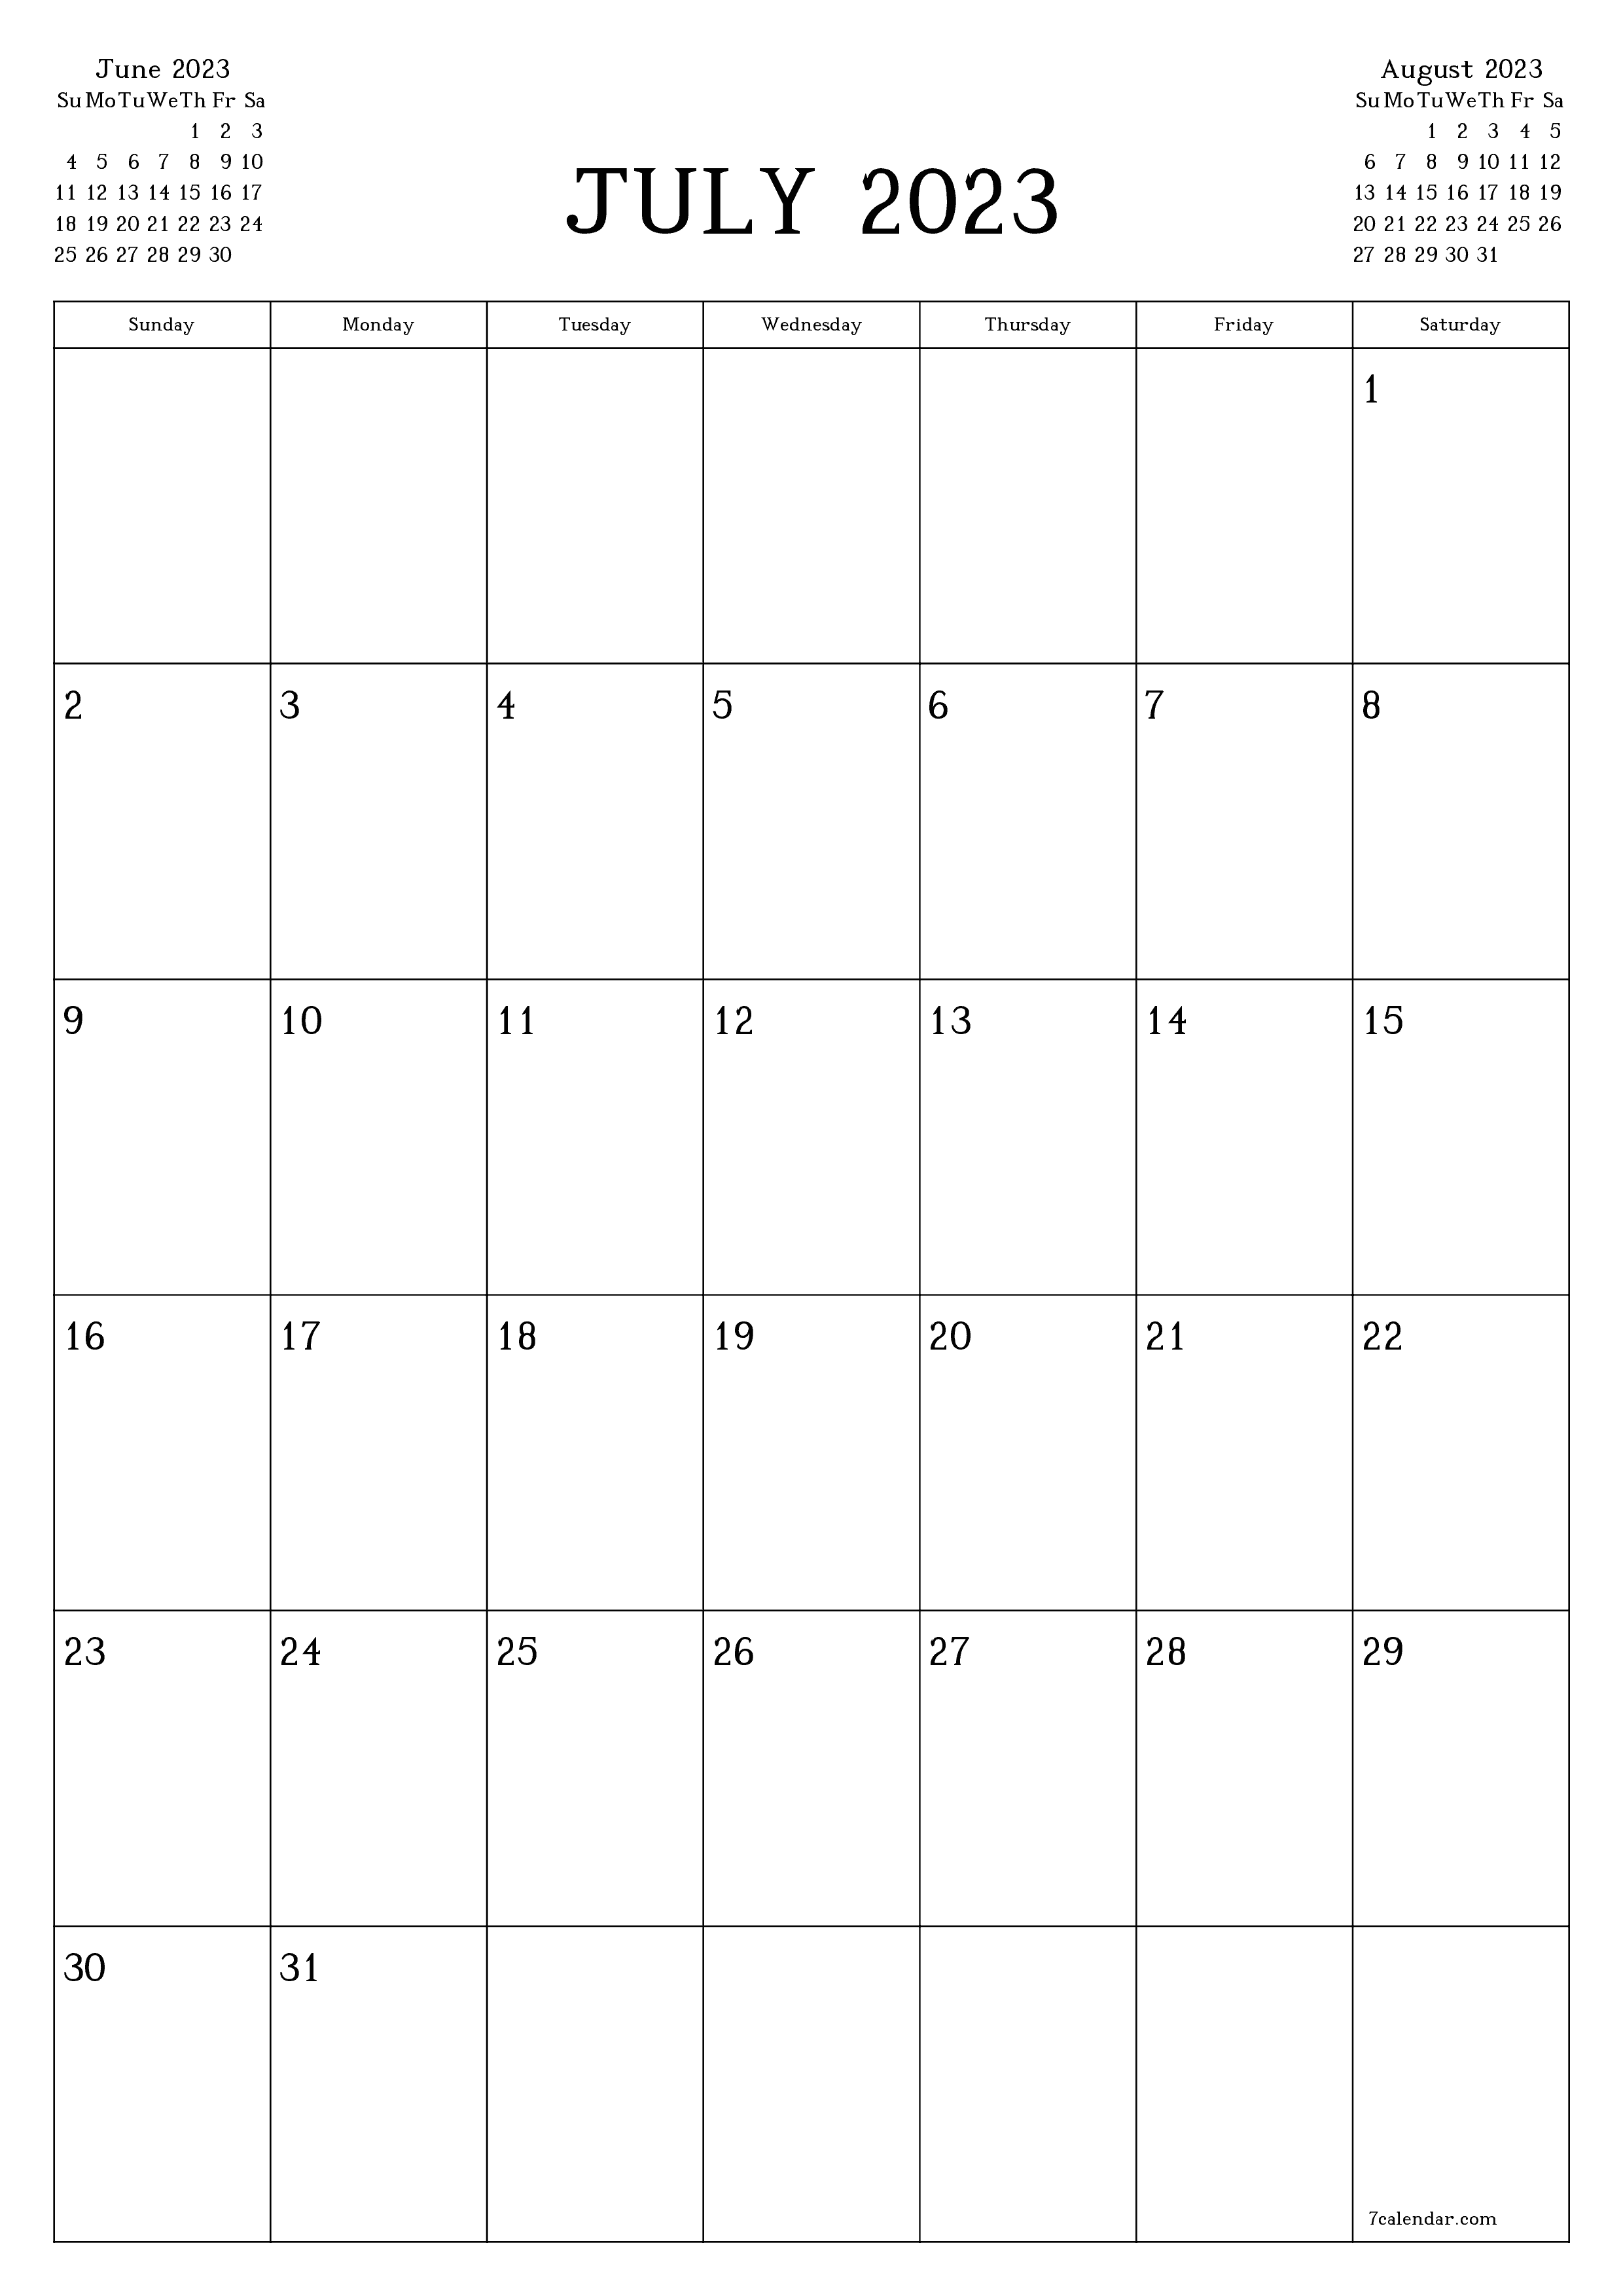 Blank monthly printable calendar and planner for month July 2023 with notes save and print to PDF PNG English - 7calendar.com